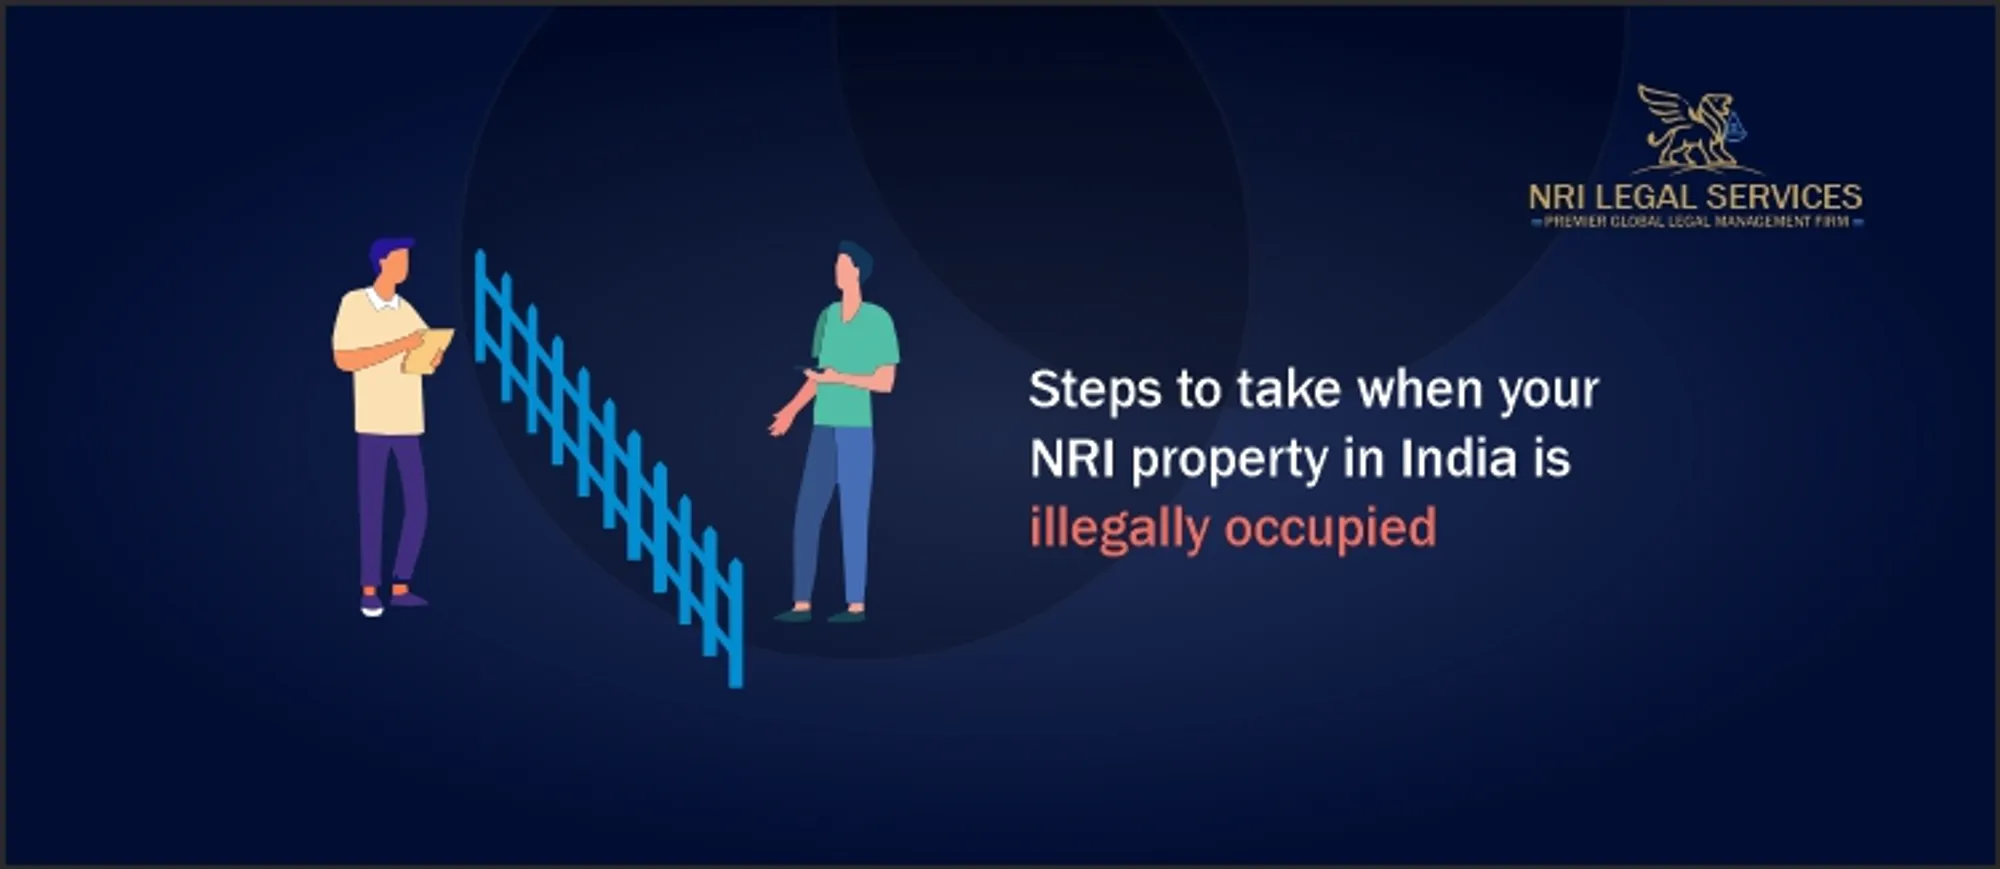 Steps to take when your NRI property in India is illegally occupied